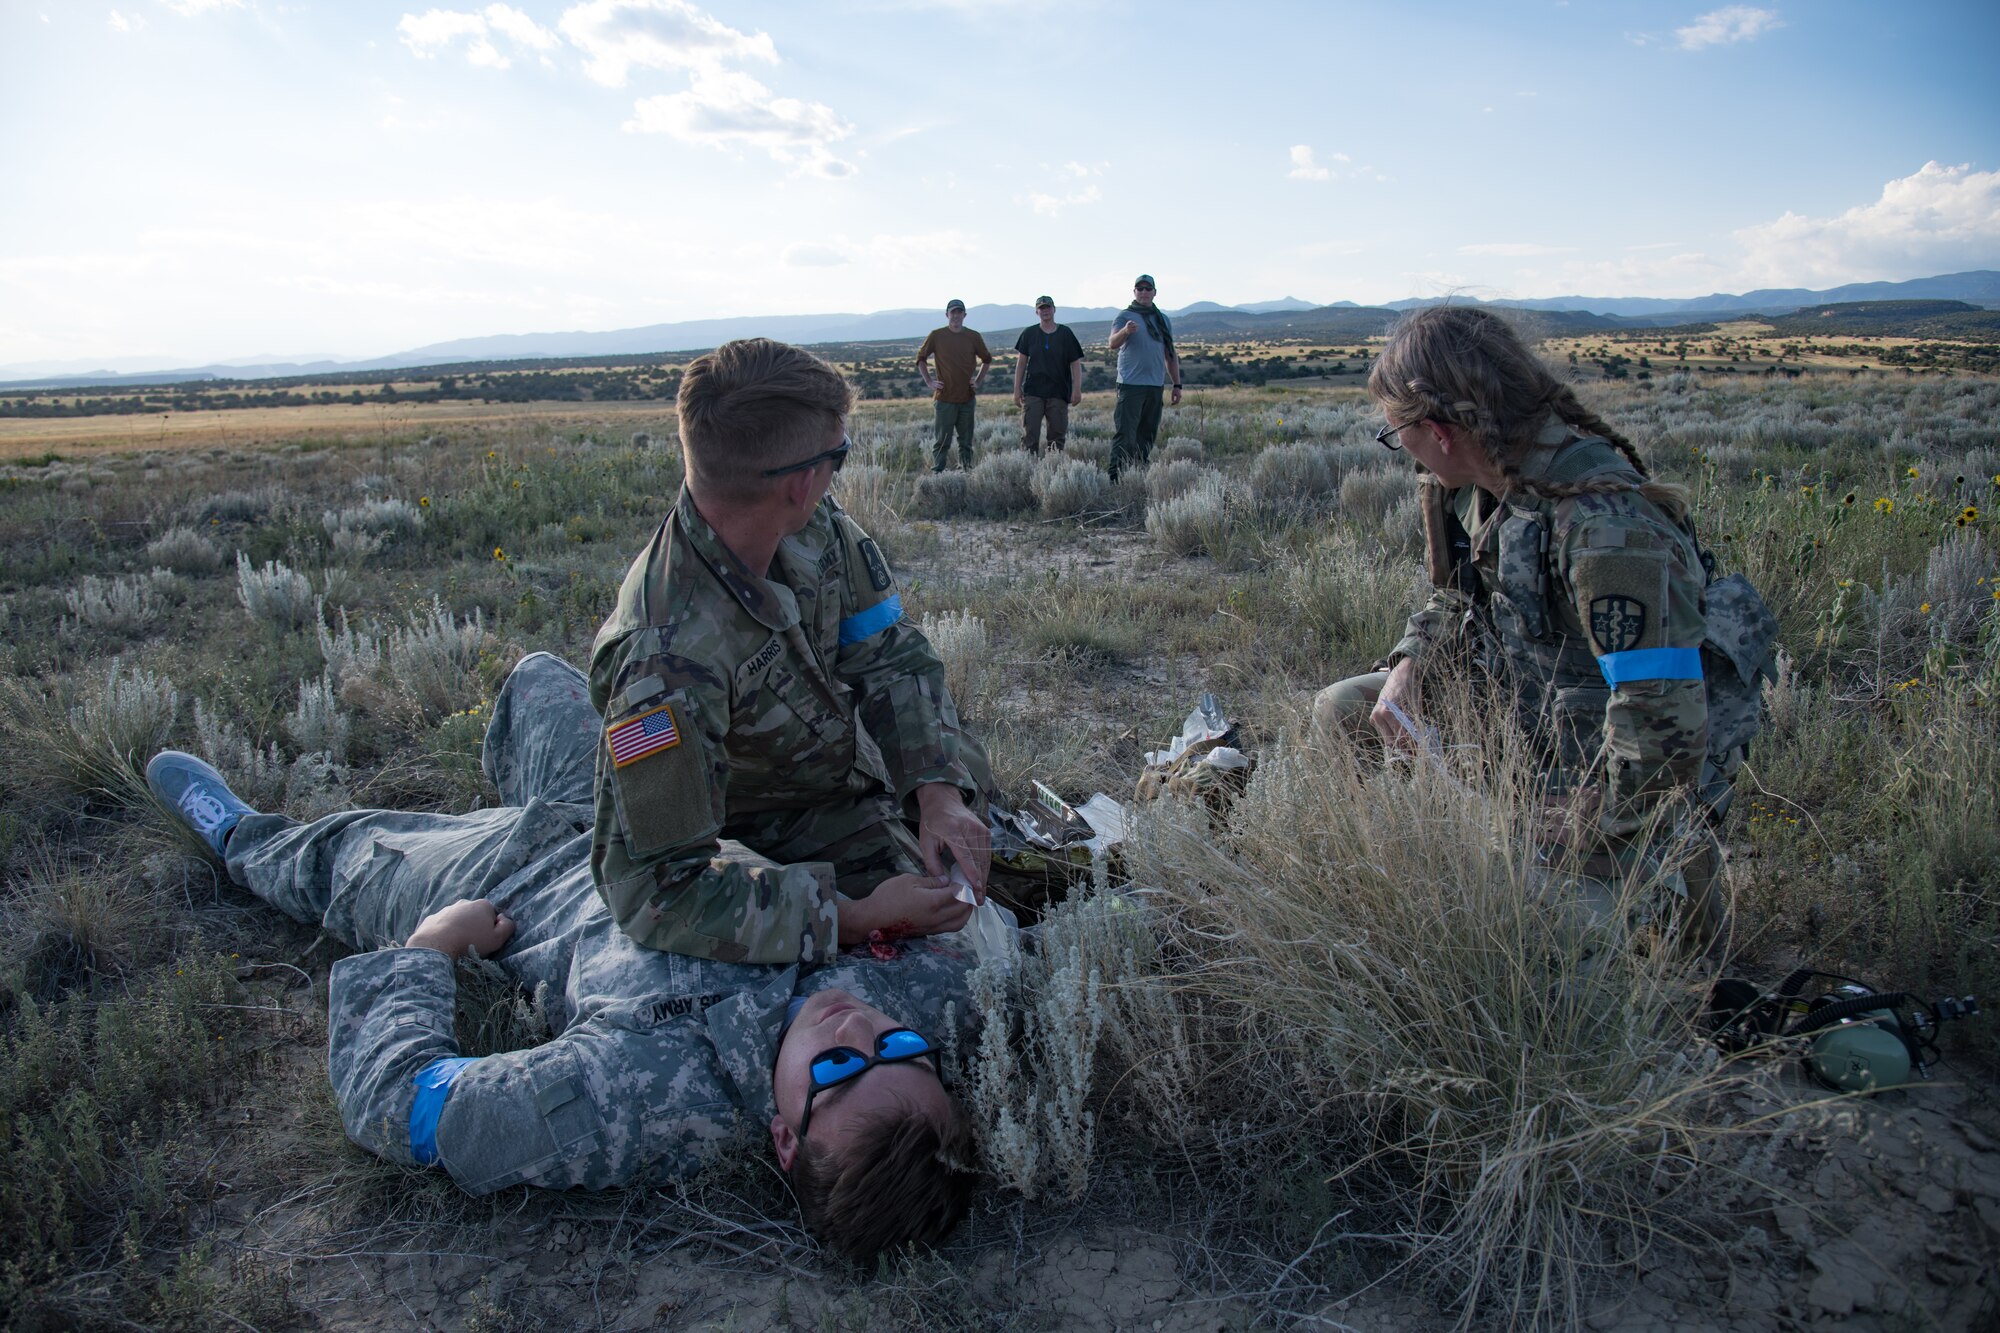 Two uniformed military personnel kneeling in a field, one with his forearm against the chest of a man laying on the ground with fake injuries, looking at three people watching in the background.